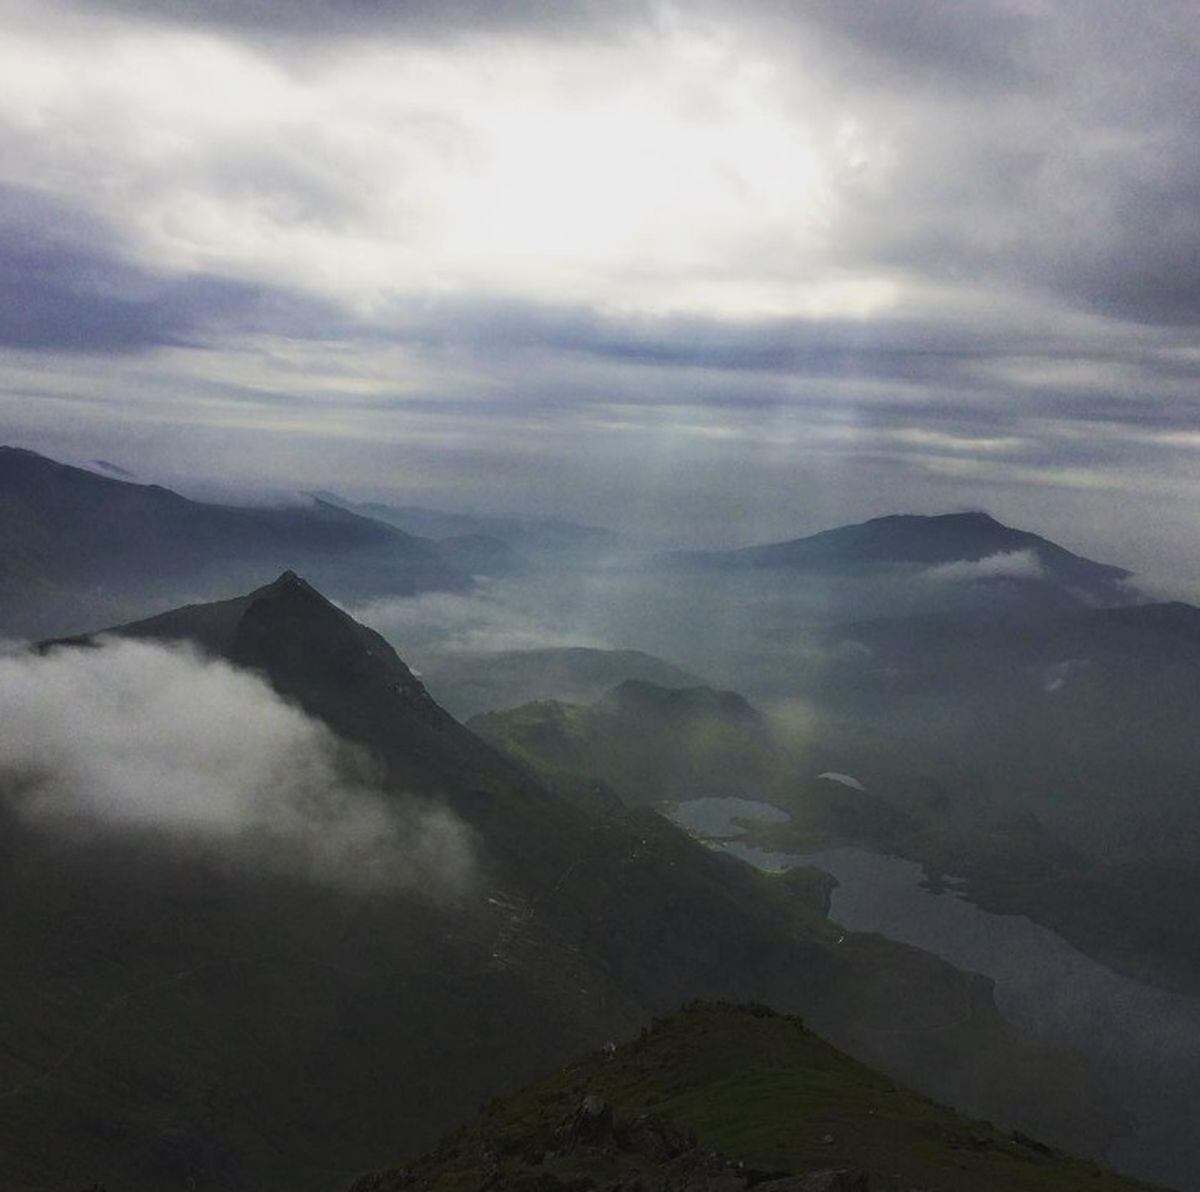 A stunning view over Crib Goch from Snowdon's summit early in the morning. Photo: Mark Morris